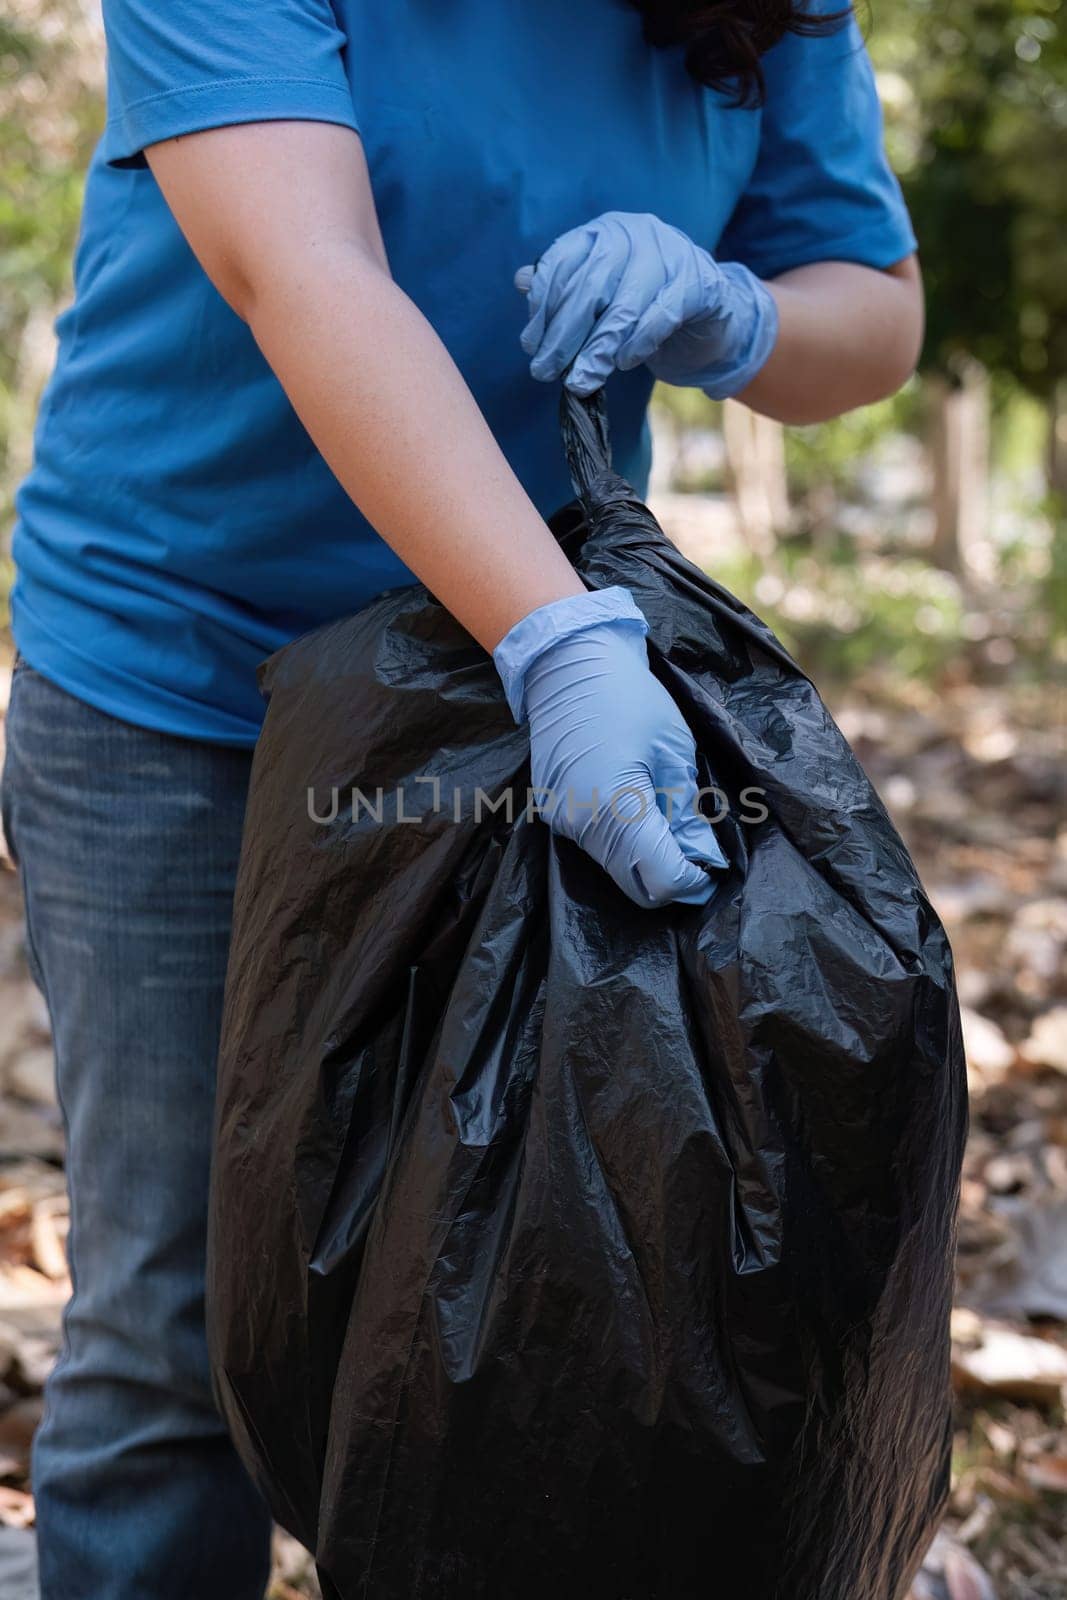 Up close, a group of Asian volunteers collects trash in plastic bags and cleans areas in the forest to preserve the natural ecosystem. by wichayada